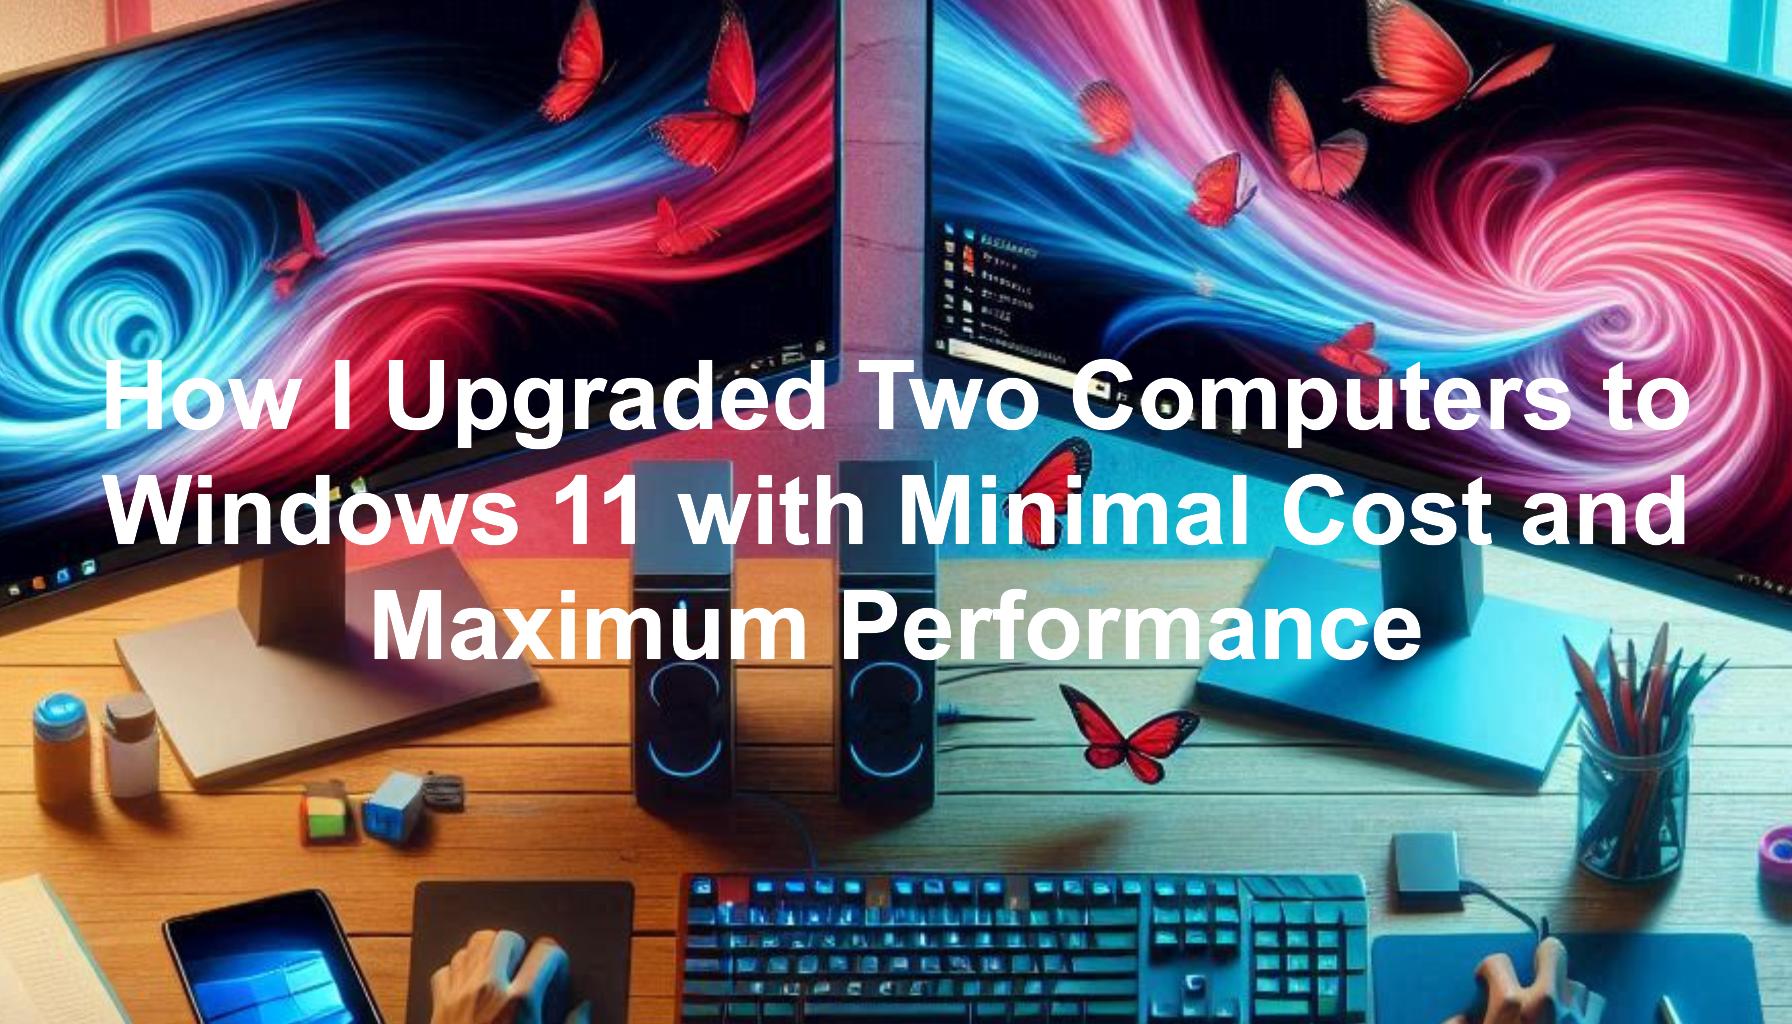 How I Upgraded Two Computers to Windows 11 with Minimal Cost and Maximum Performance